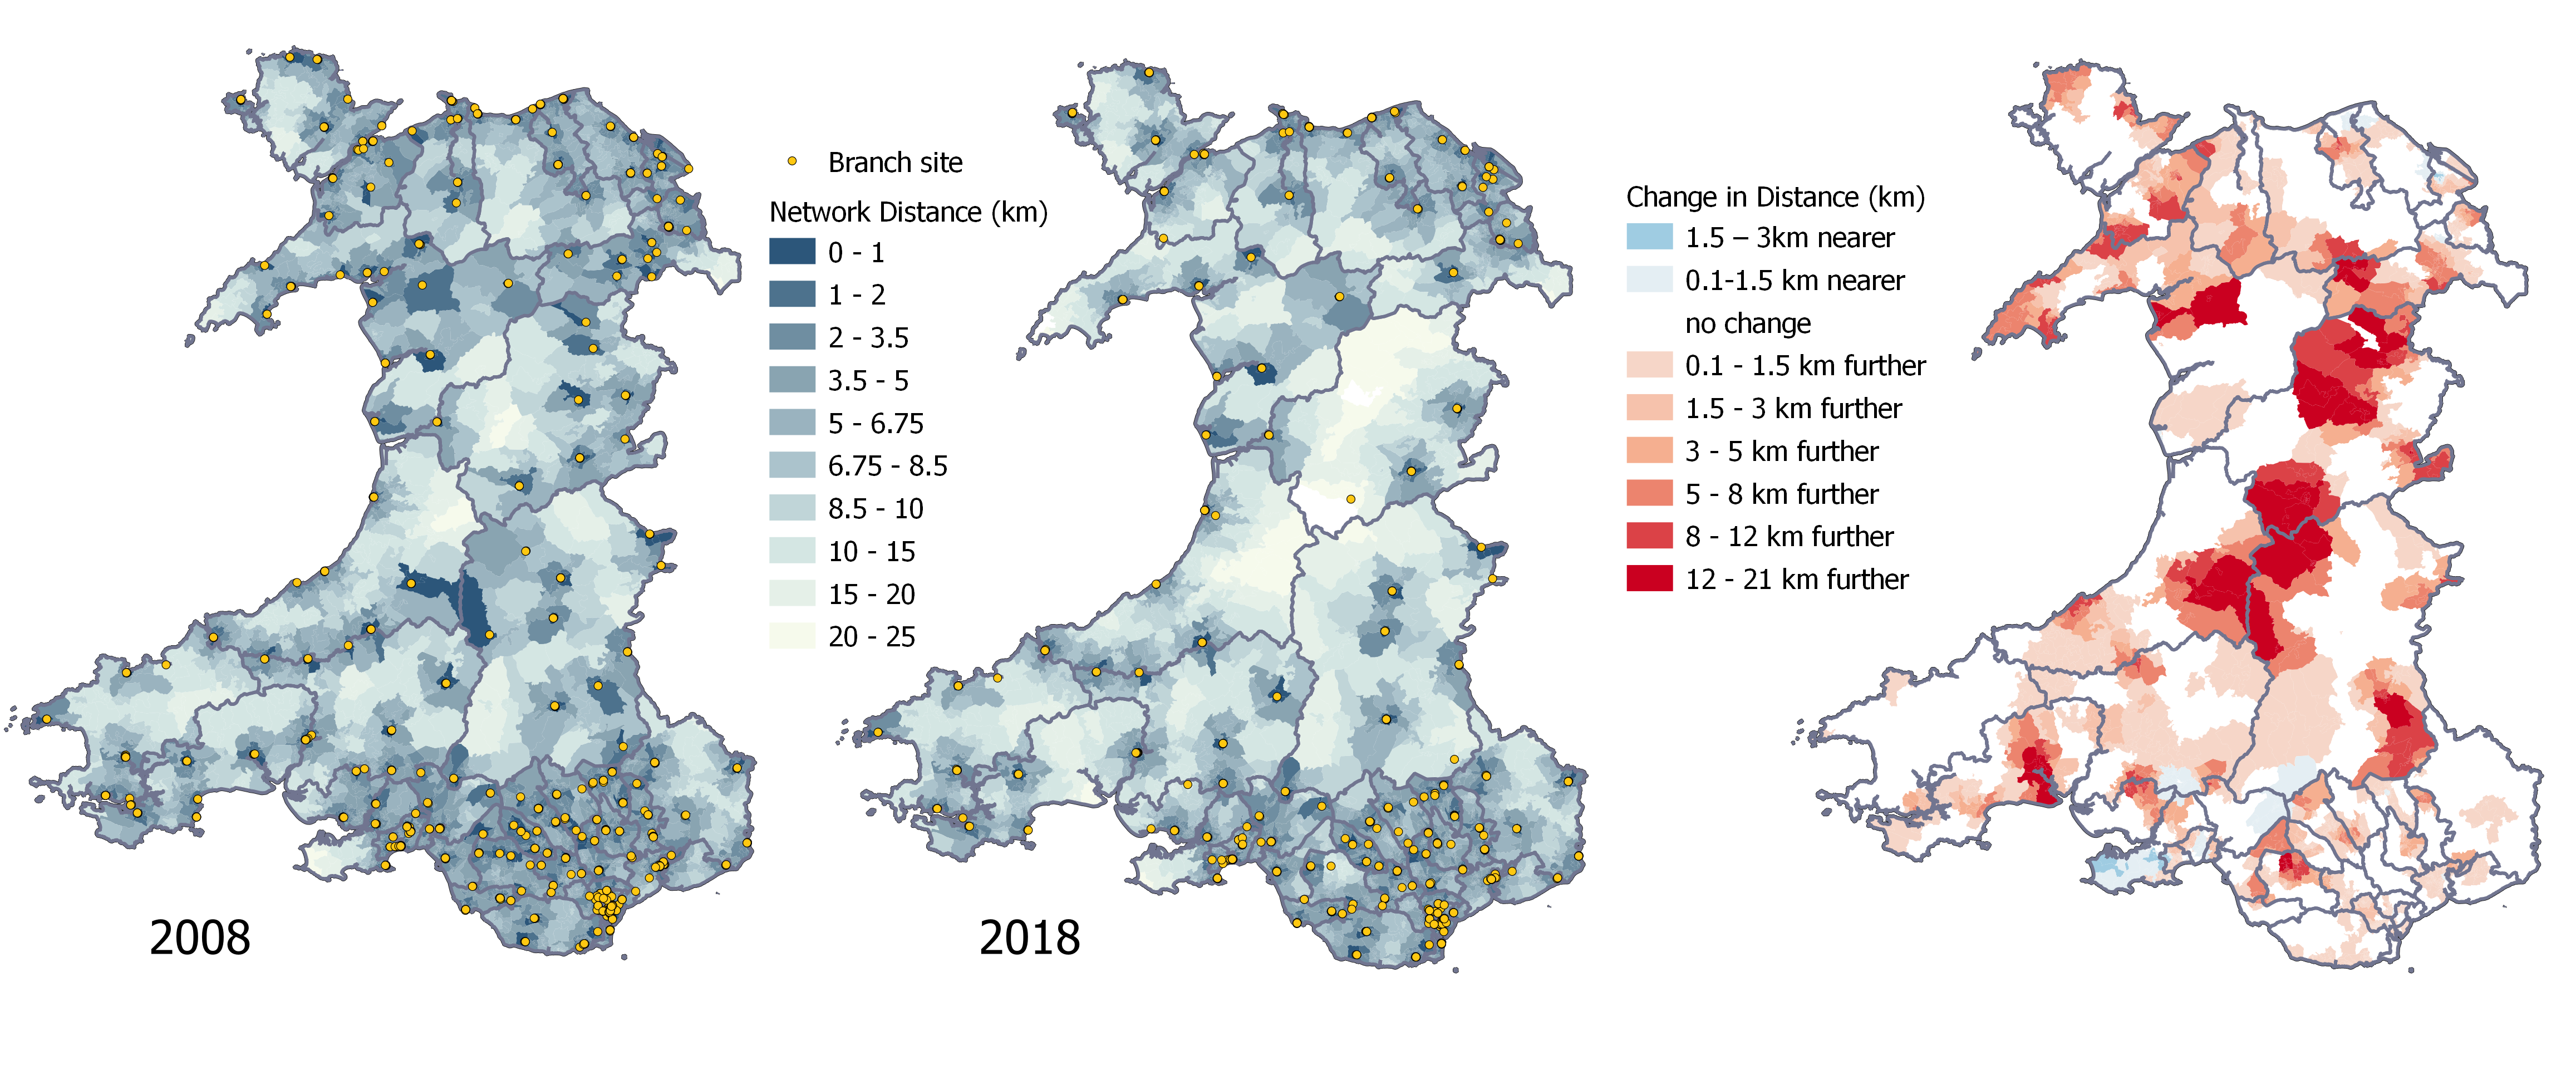 Three maps. First map shows the travel distance to nearest bank branch in 2008, second map shows the travel distance to nearest bank branch in 2018 and the third map shows the difference between travel distances in 2008 and 2018